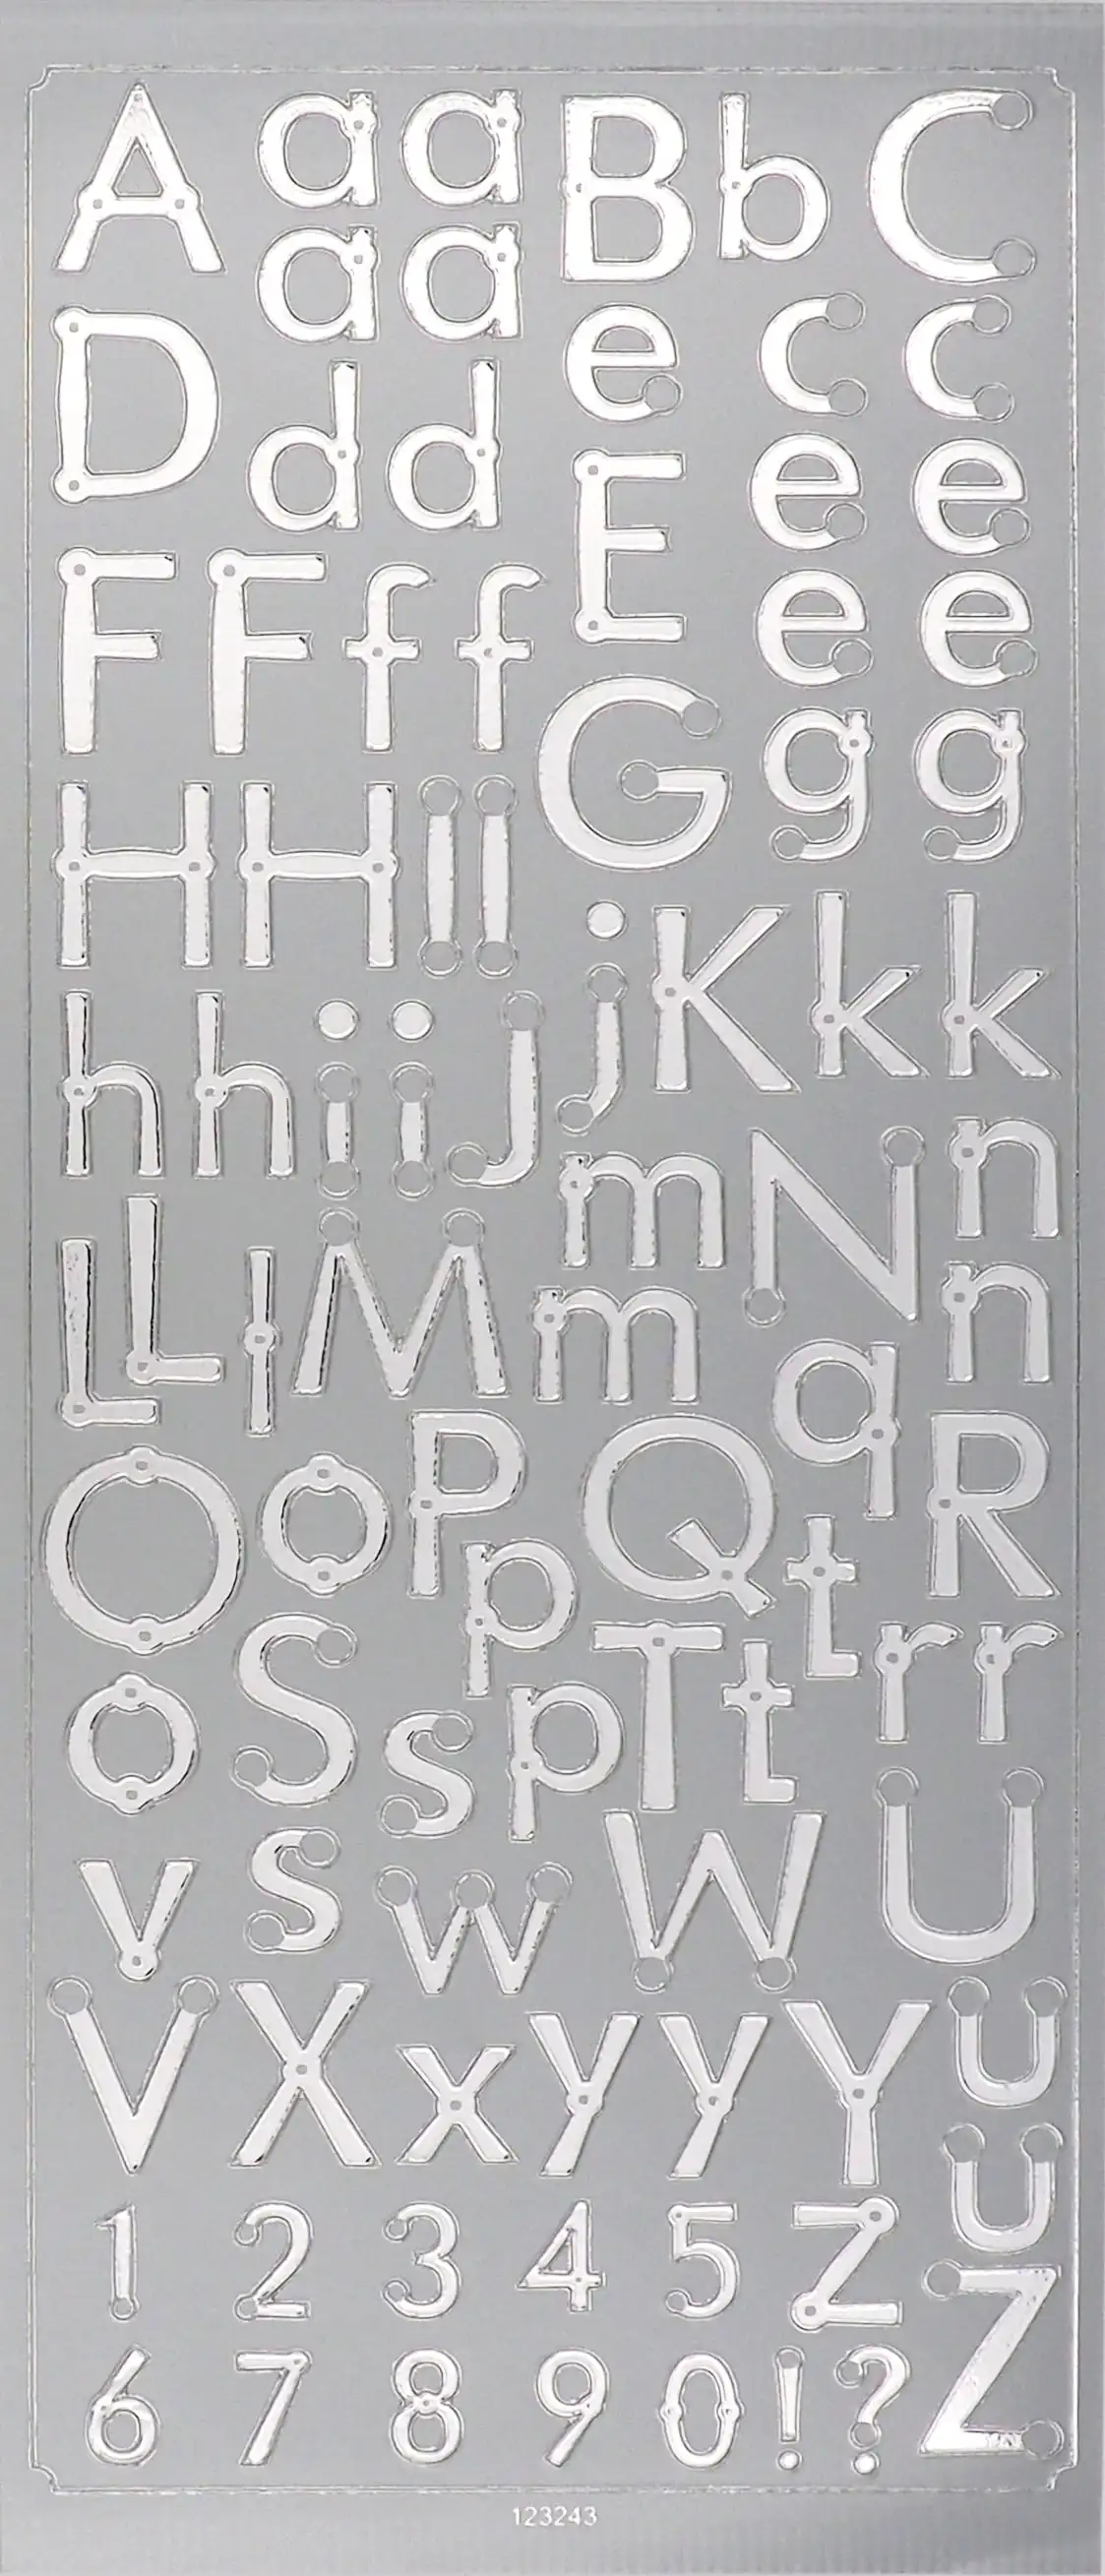 Arbee Foil Stickers Alpha Lower Case, Silver